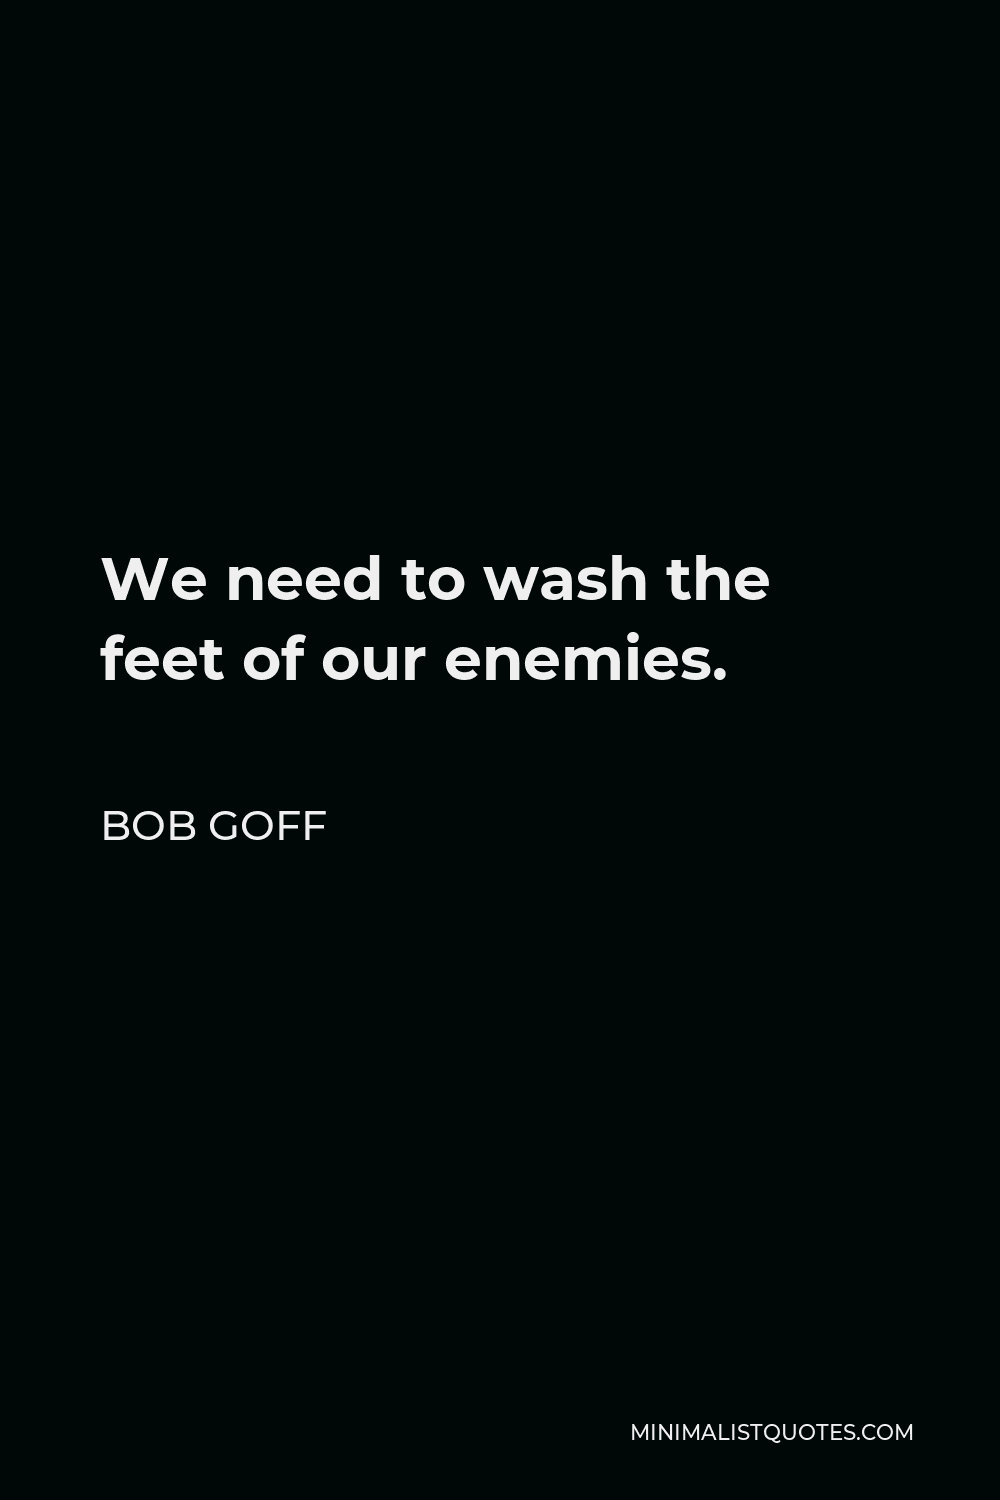 Bob Goff Quote - We need to wash the feet of our enemies.